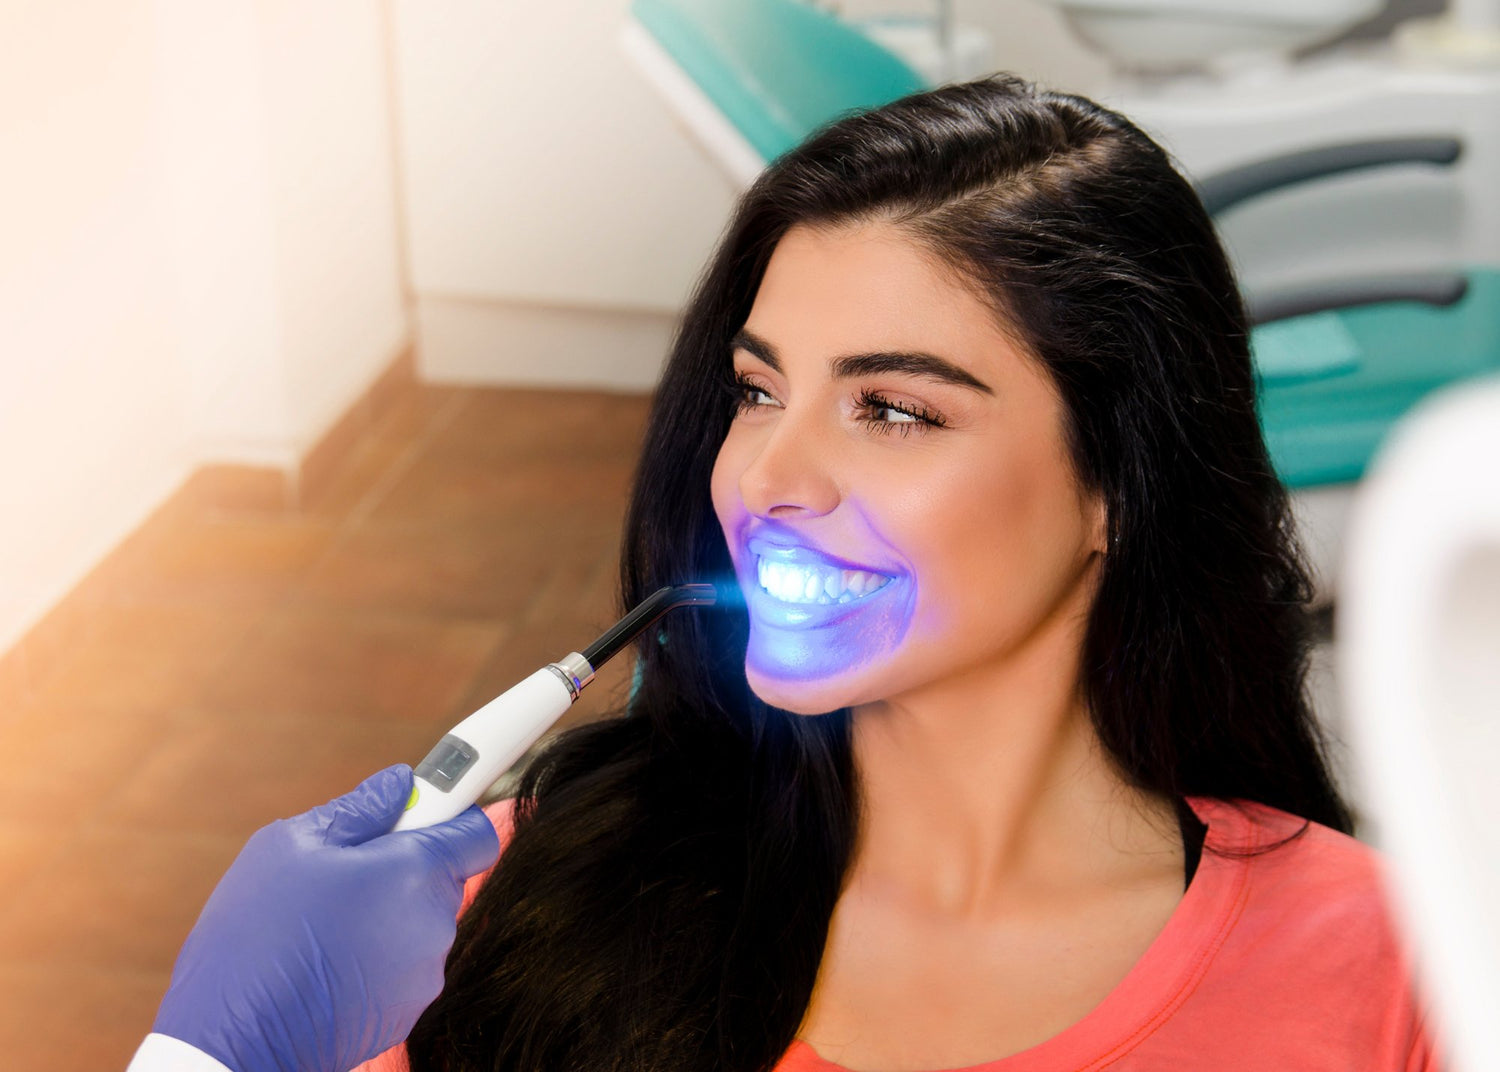 Are Teeth Whitening Pens Work as a Color Corrector? - MySmile